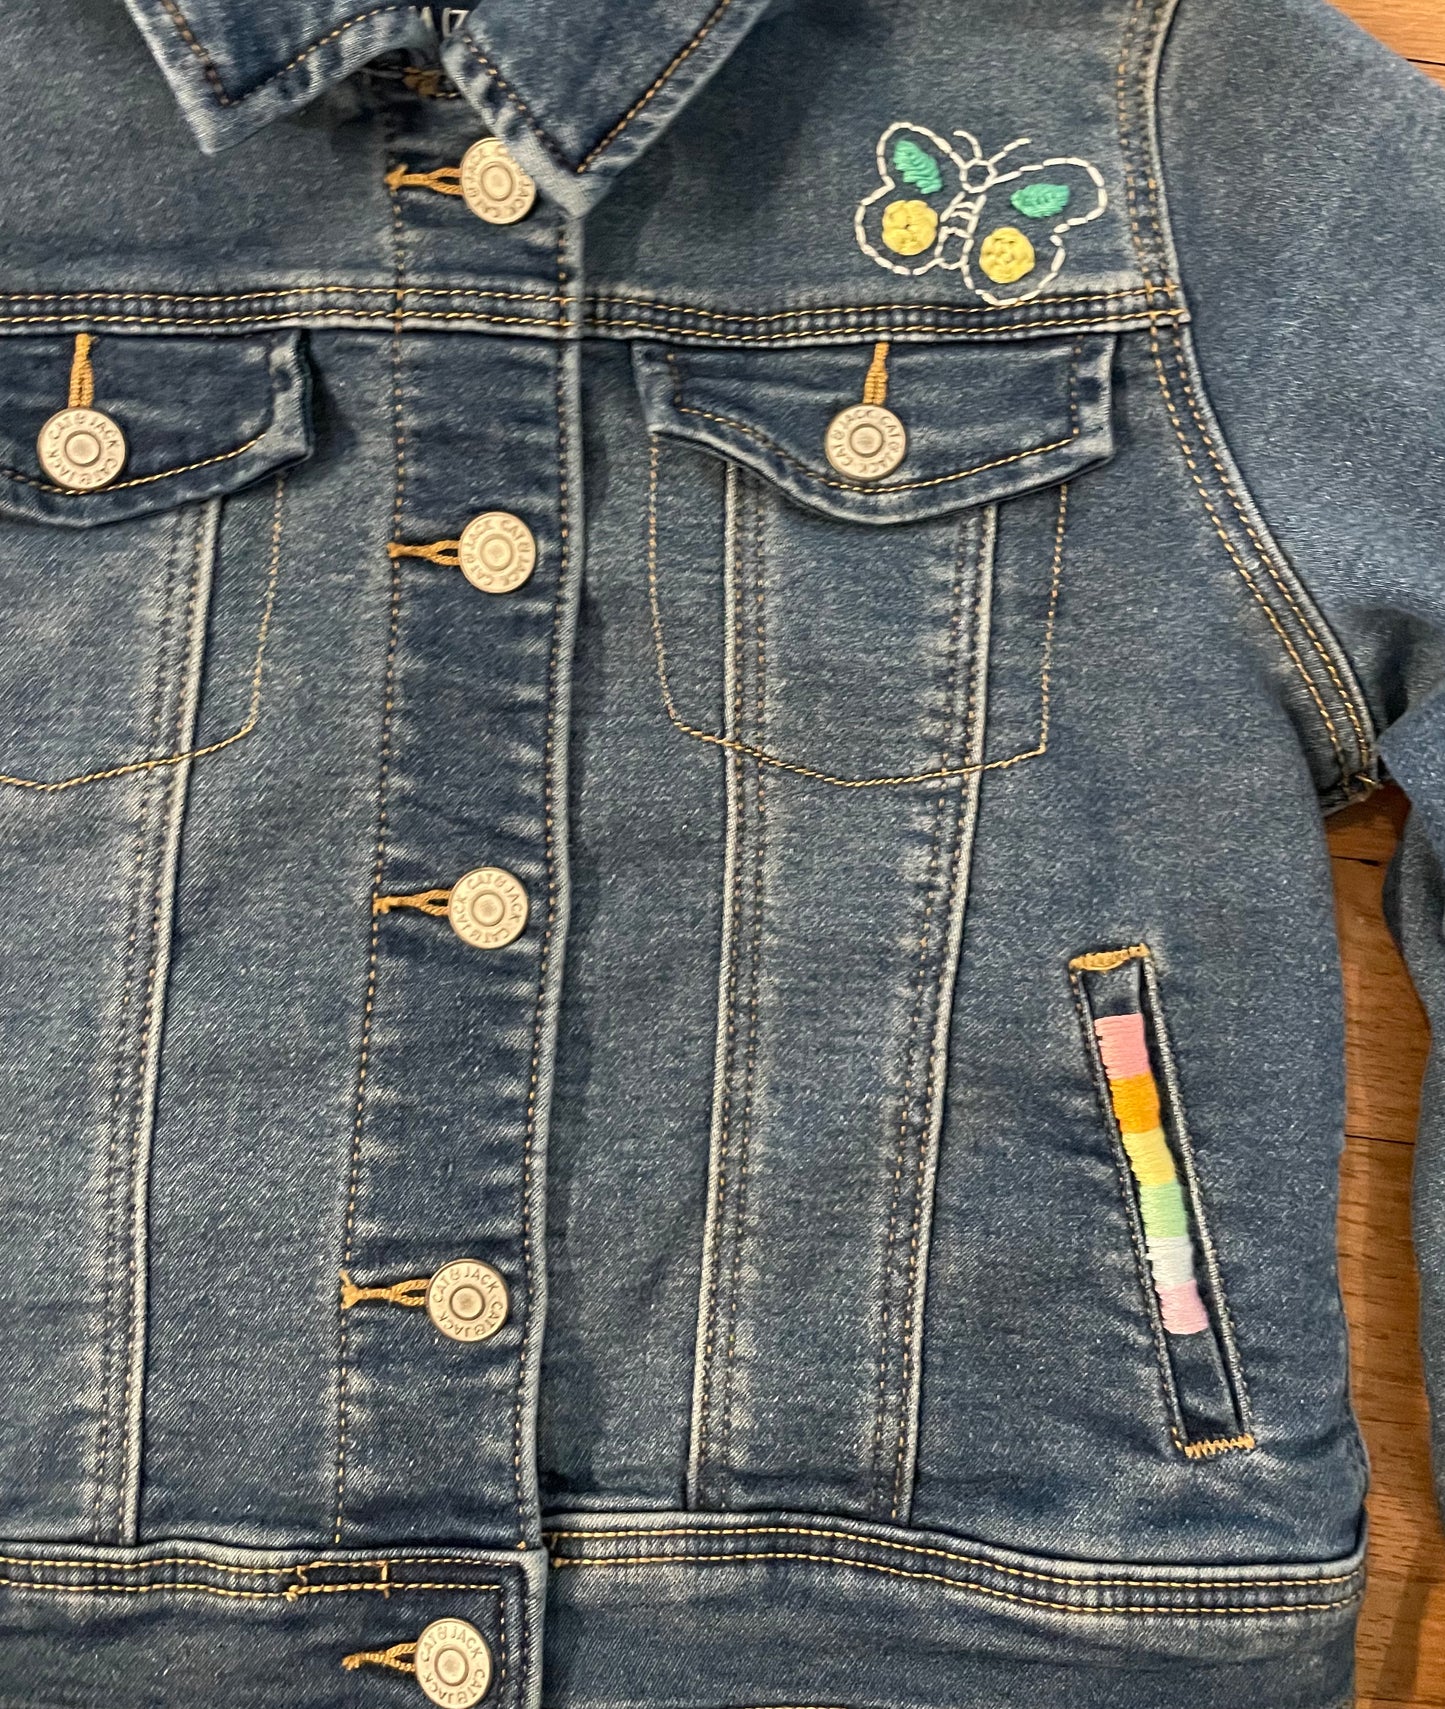 Jean Jacket - youth (hand embroidered)